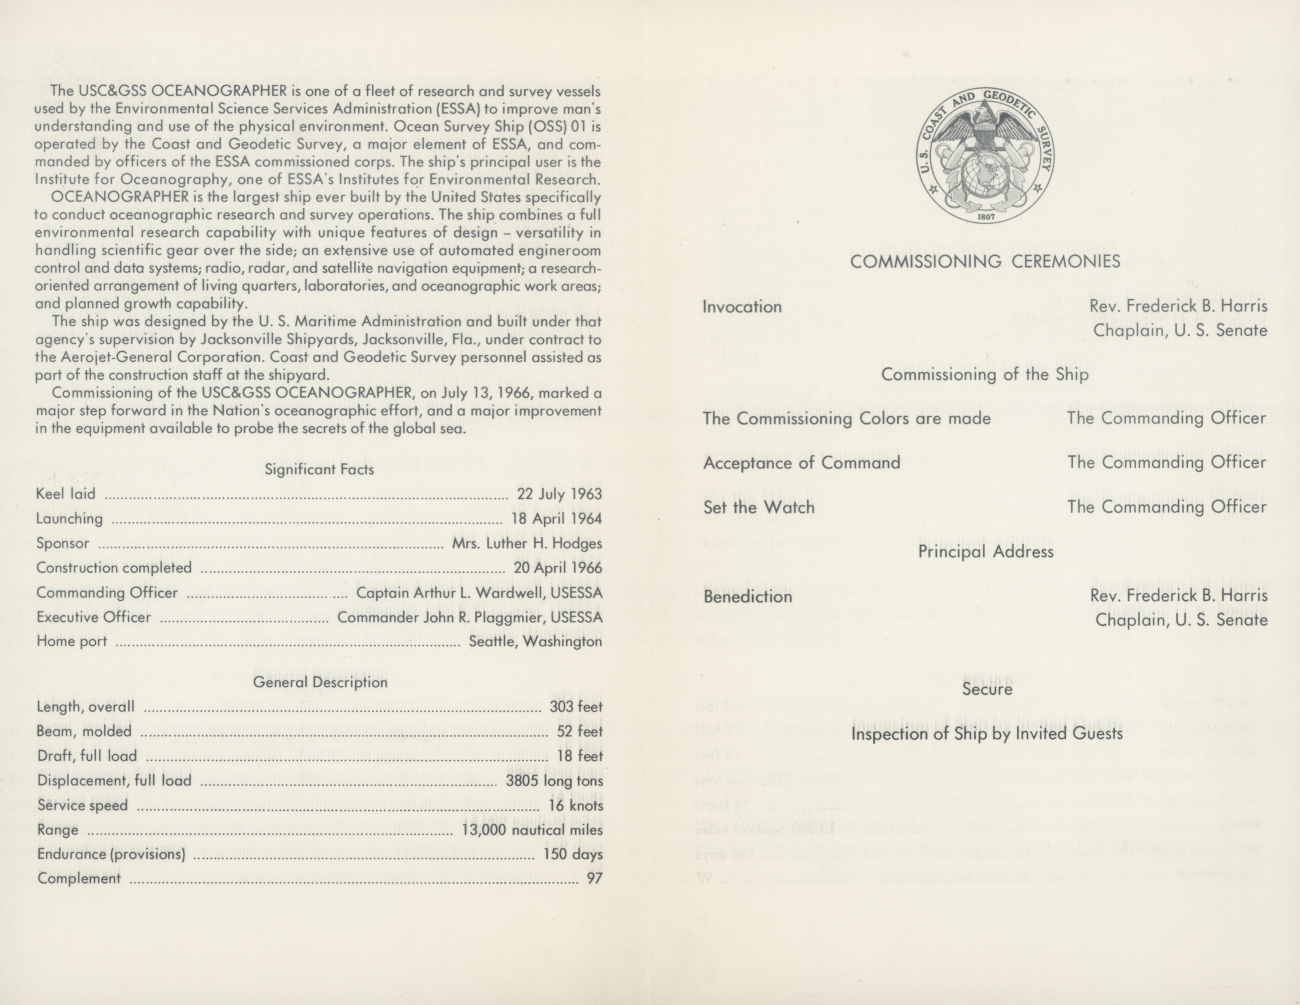 Invitation to commissioning ceremony of USC&GS; Ship OCEANOGRAPHER onJuly 13, 1966